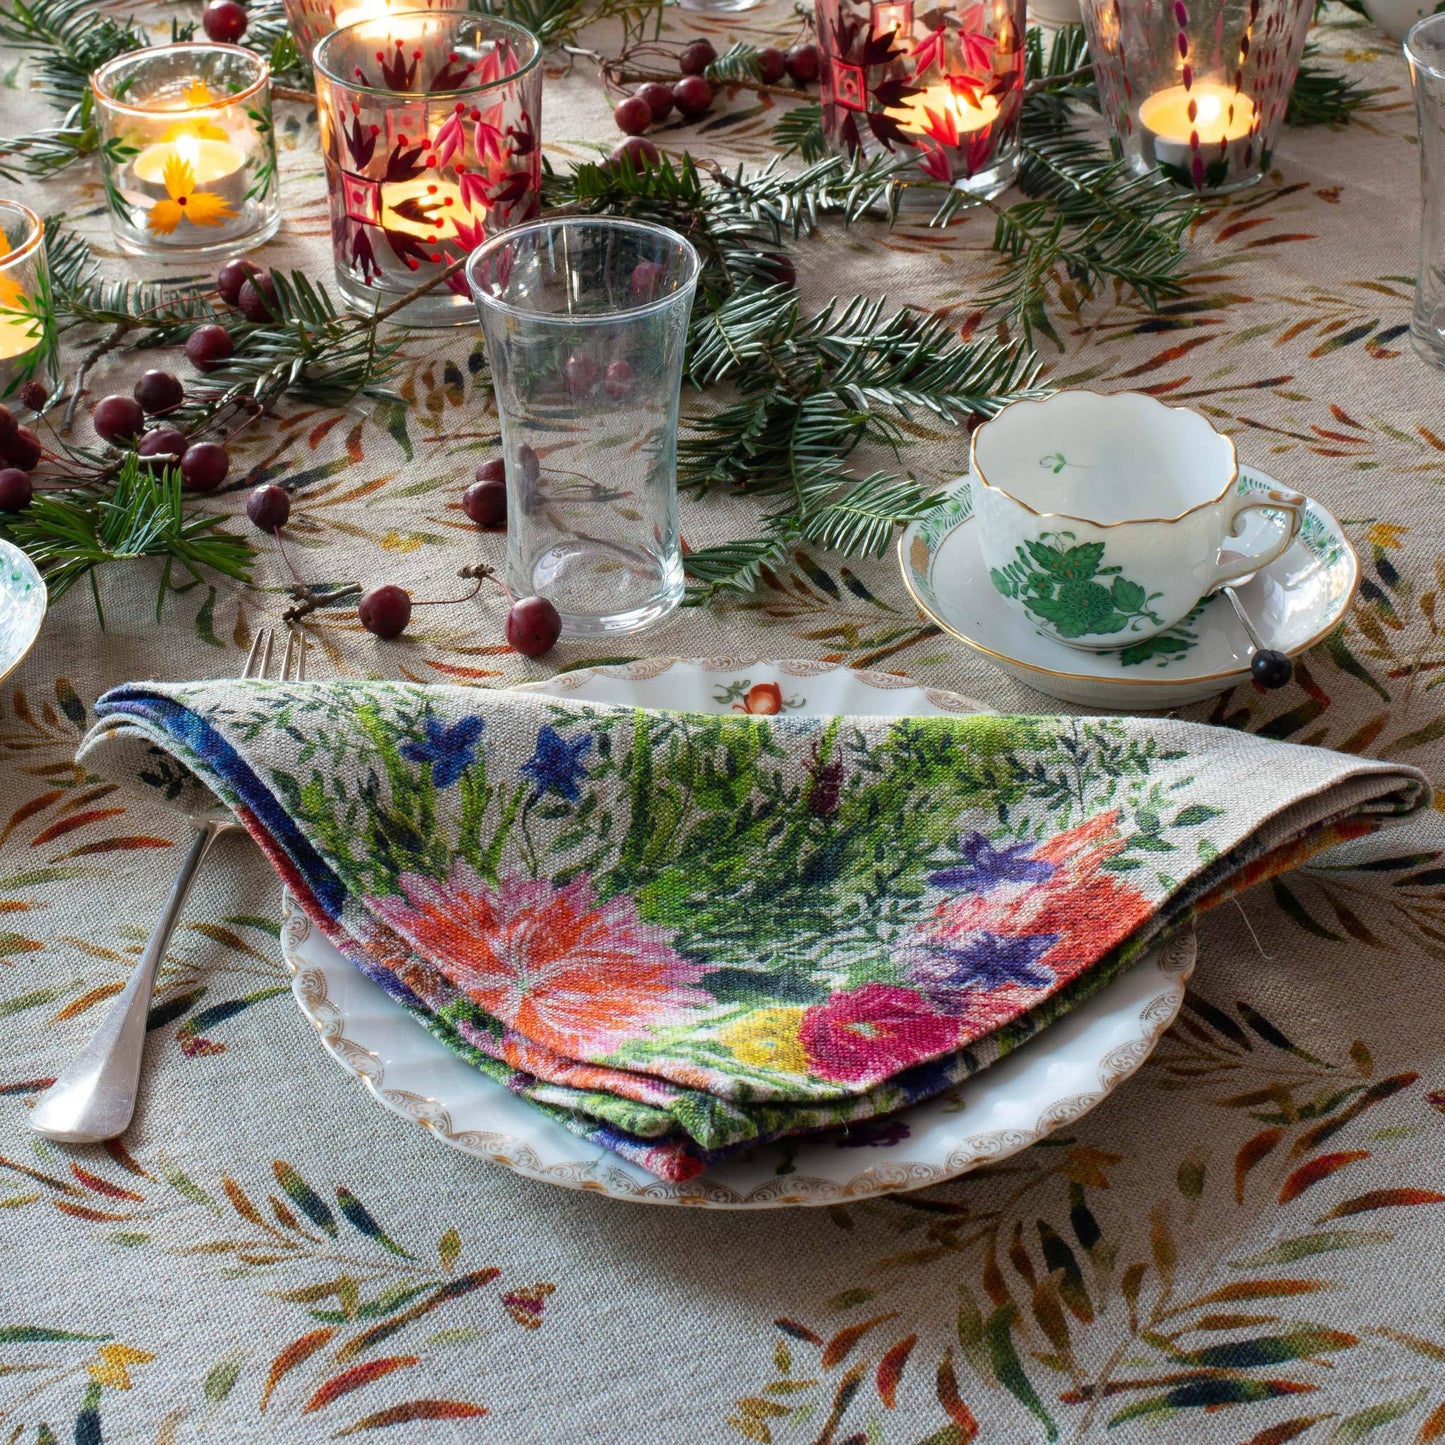 Colorful table scape with floral patterned linen napkin.